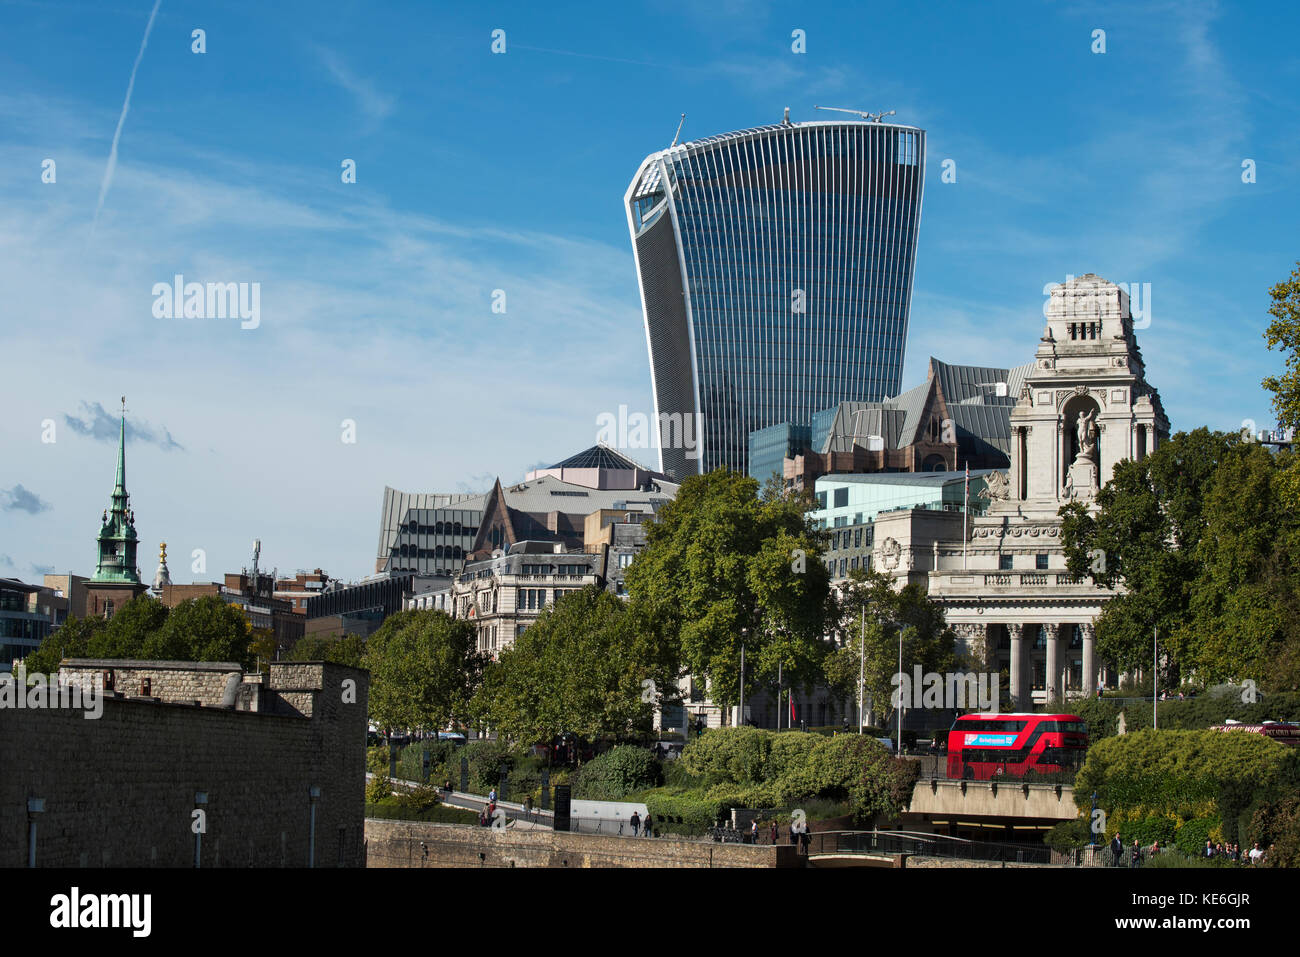 City of London modern buildings contrasting with old buildings photographed from Tower Bridge, London England. Oct 2017 Seen here 20 Fenchurch Street  Stock Photo